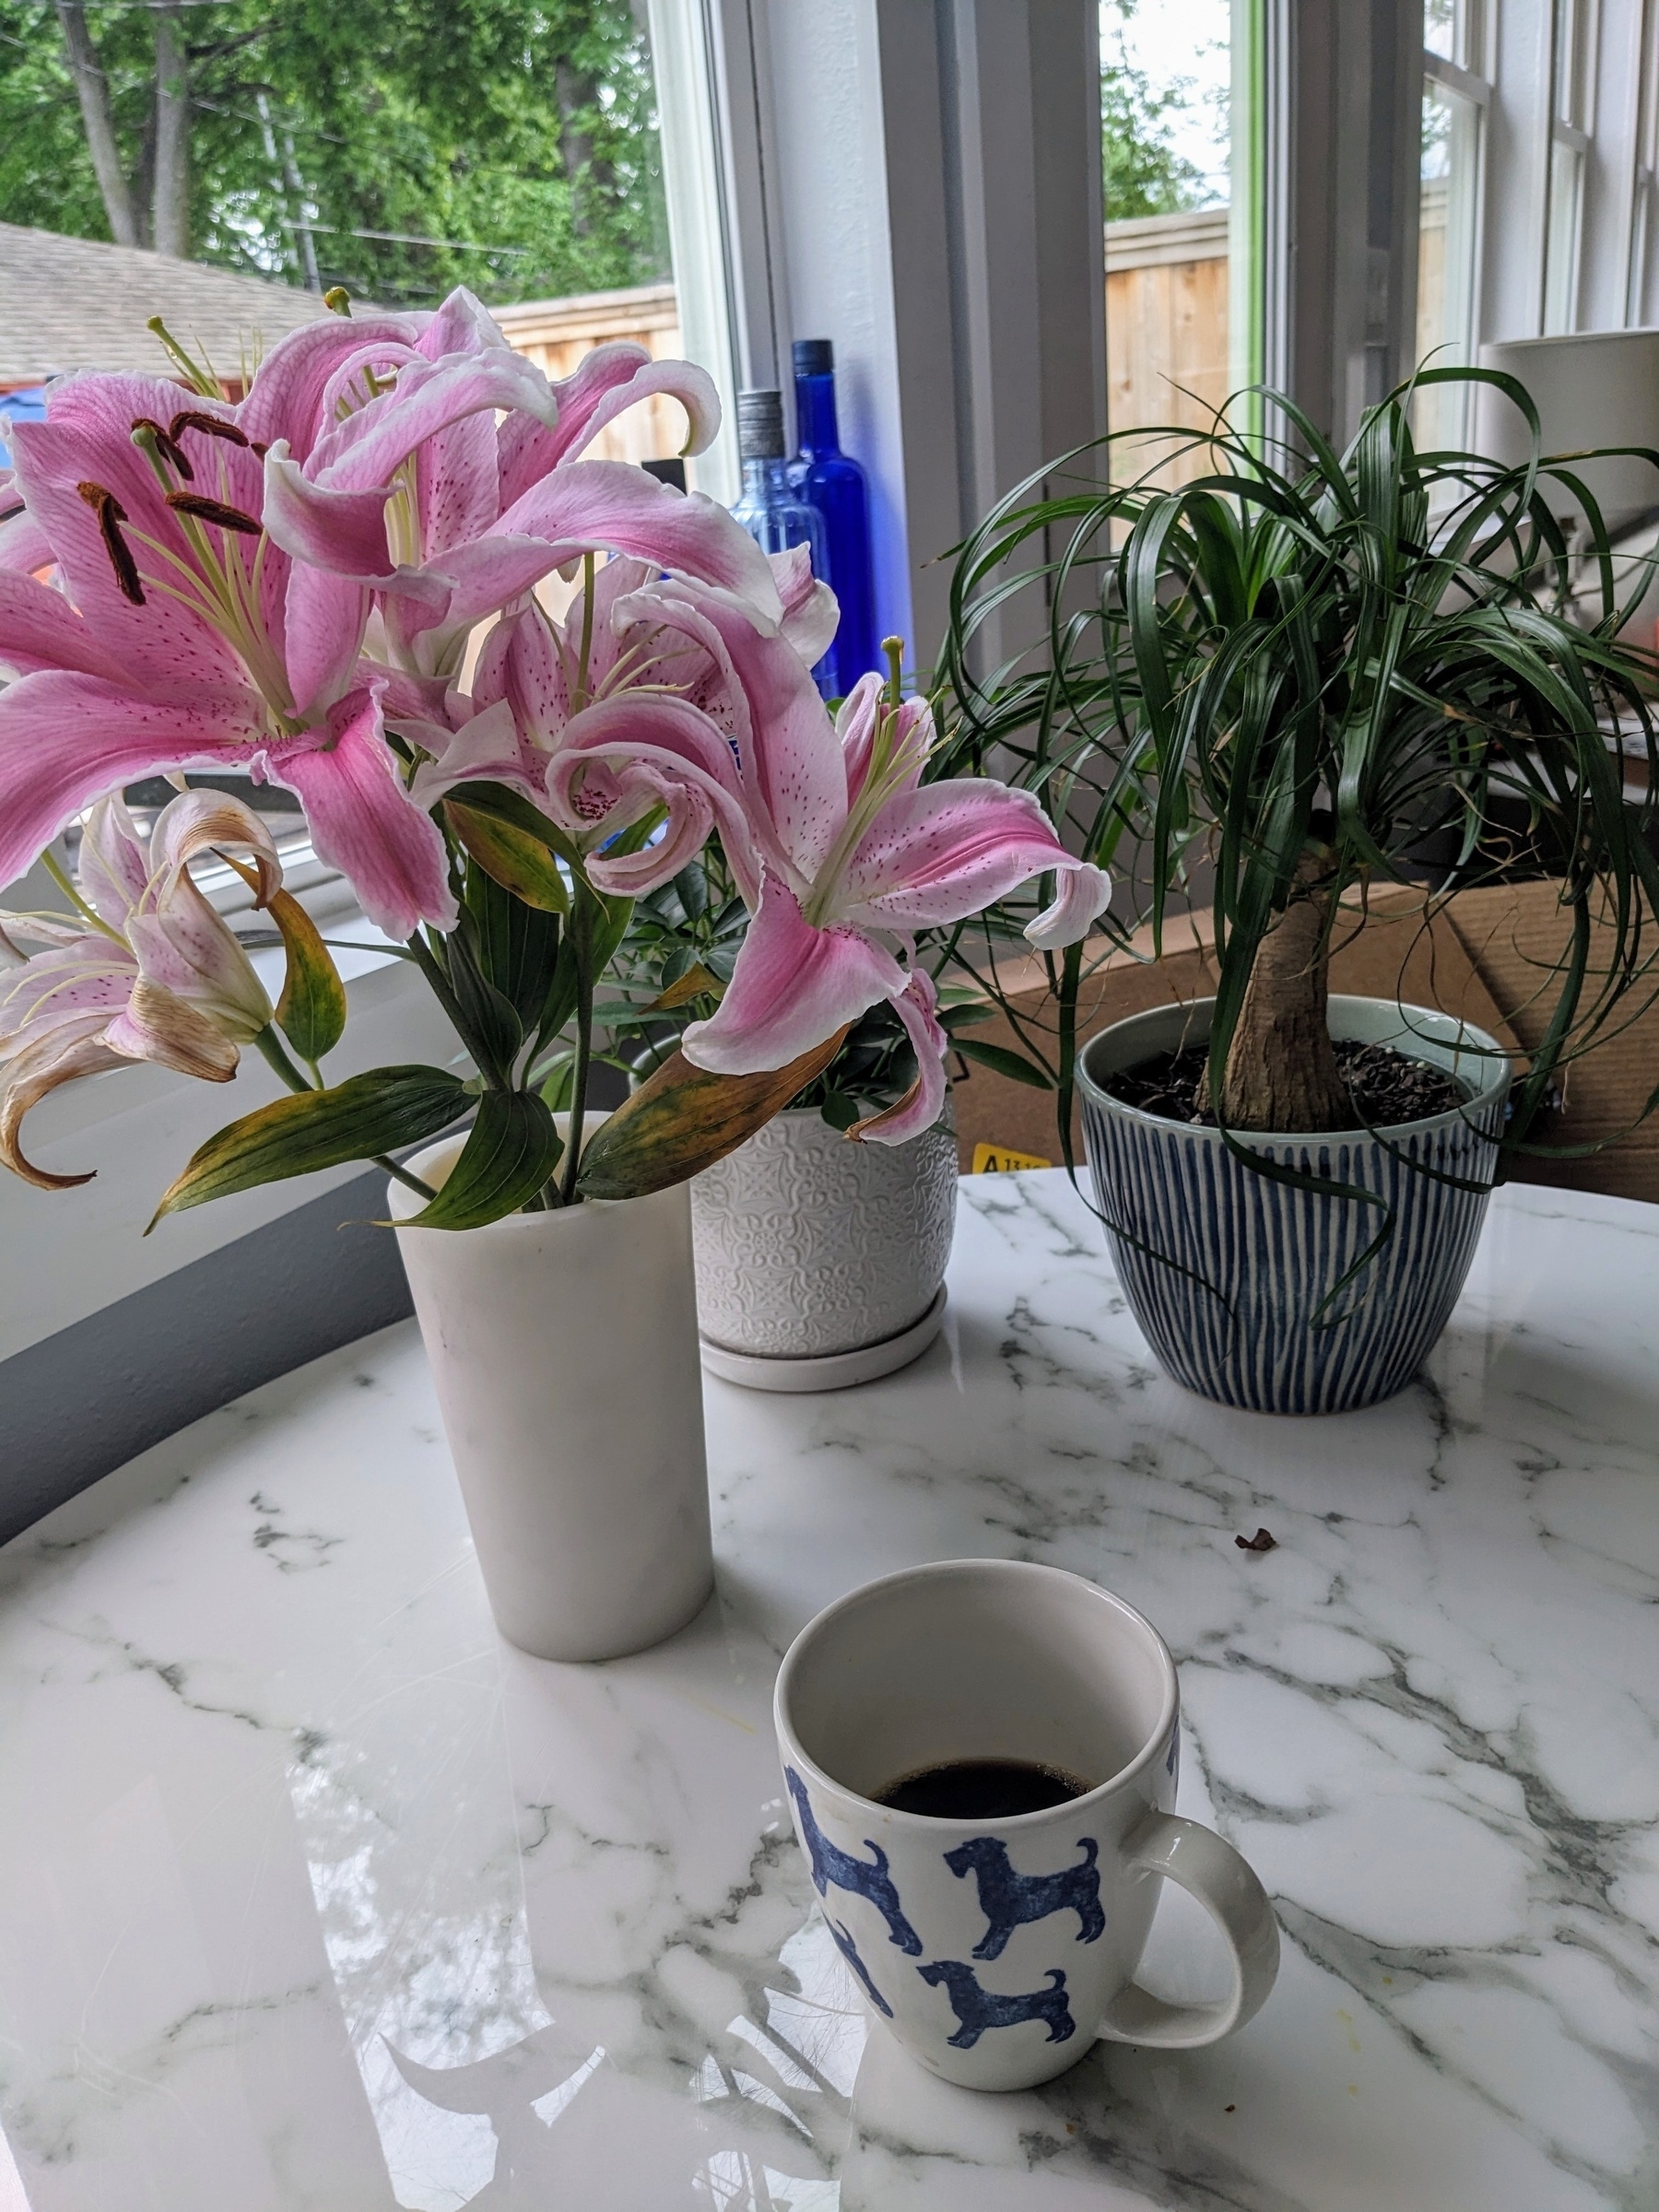 Breakfast table with a coffee cup, vase Stargazer lilies,  and other small potted plants.